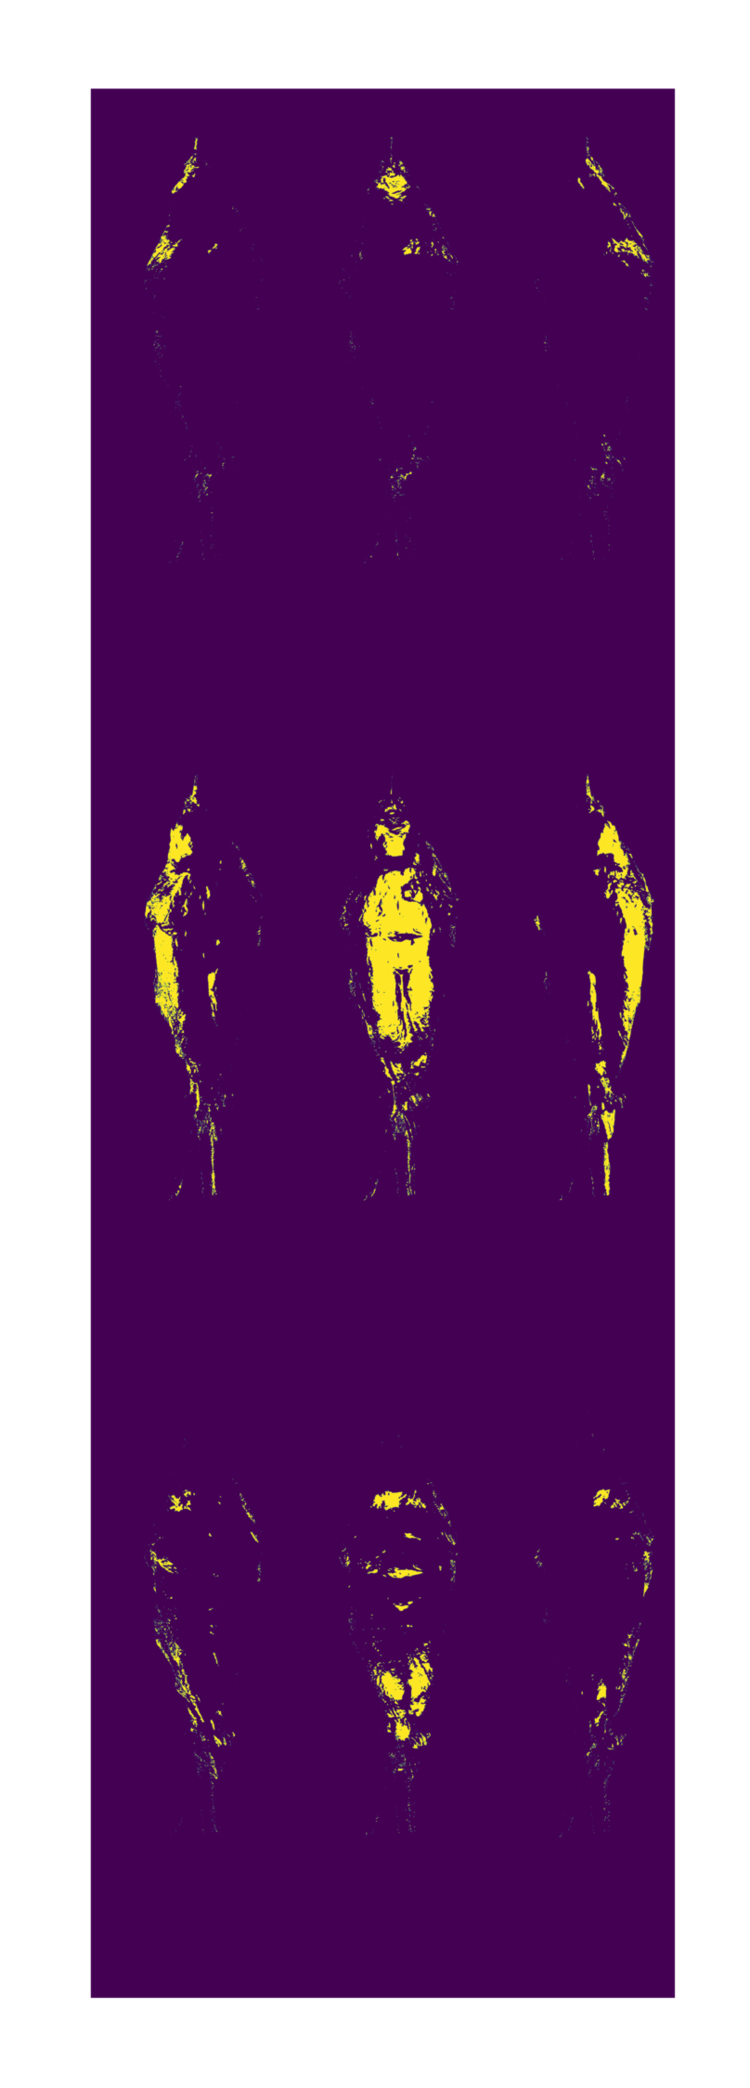 yellow scans of the body of a bird taken from different angles on a purple background